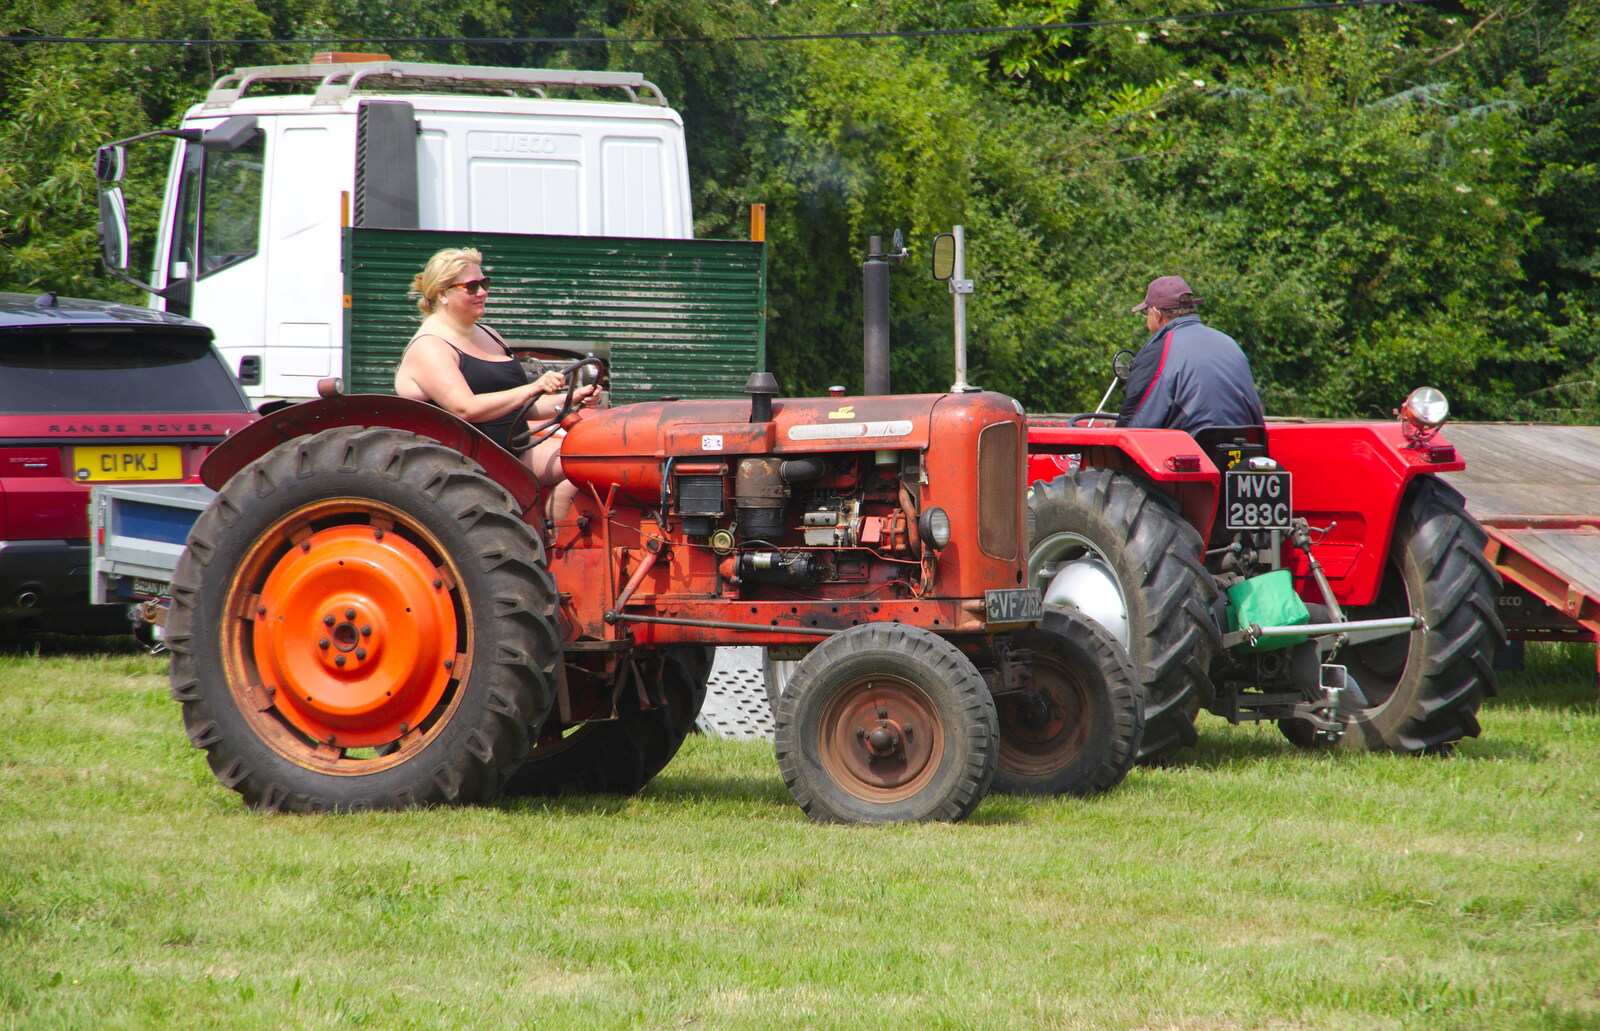 Another vintage tractor from A Hog Roast on Little Green, Thrandeston, Suffolk - 23rd June 2019